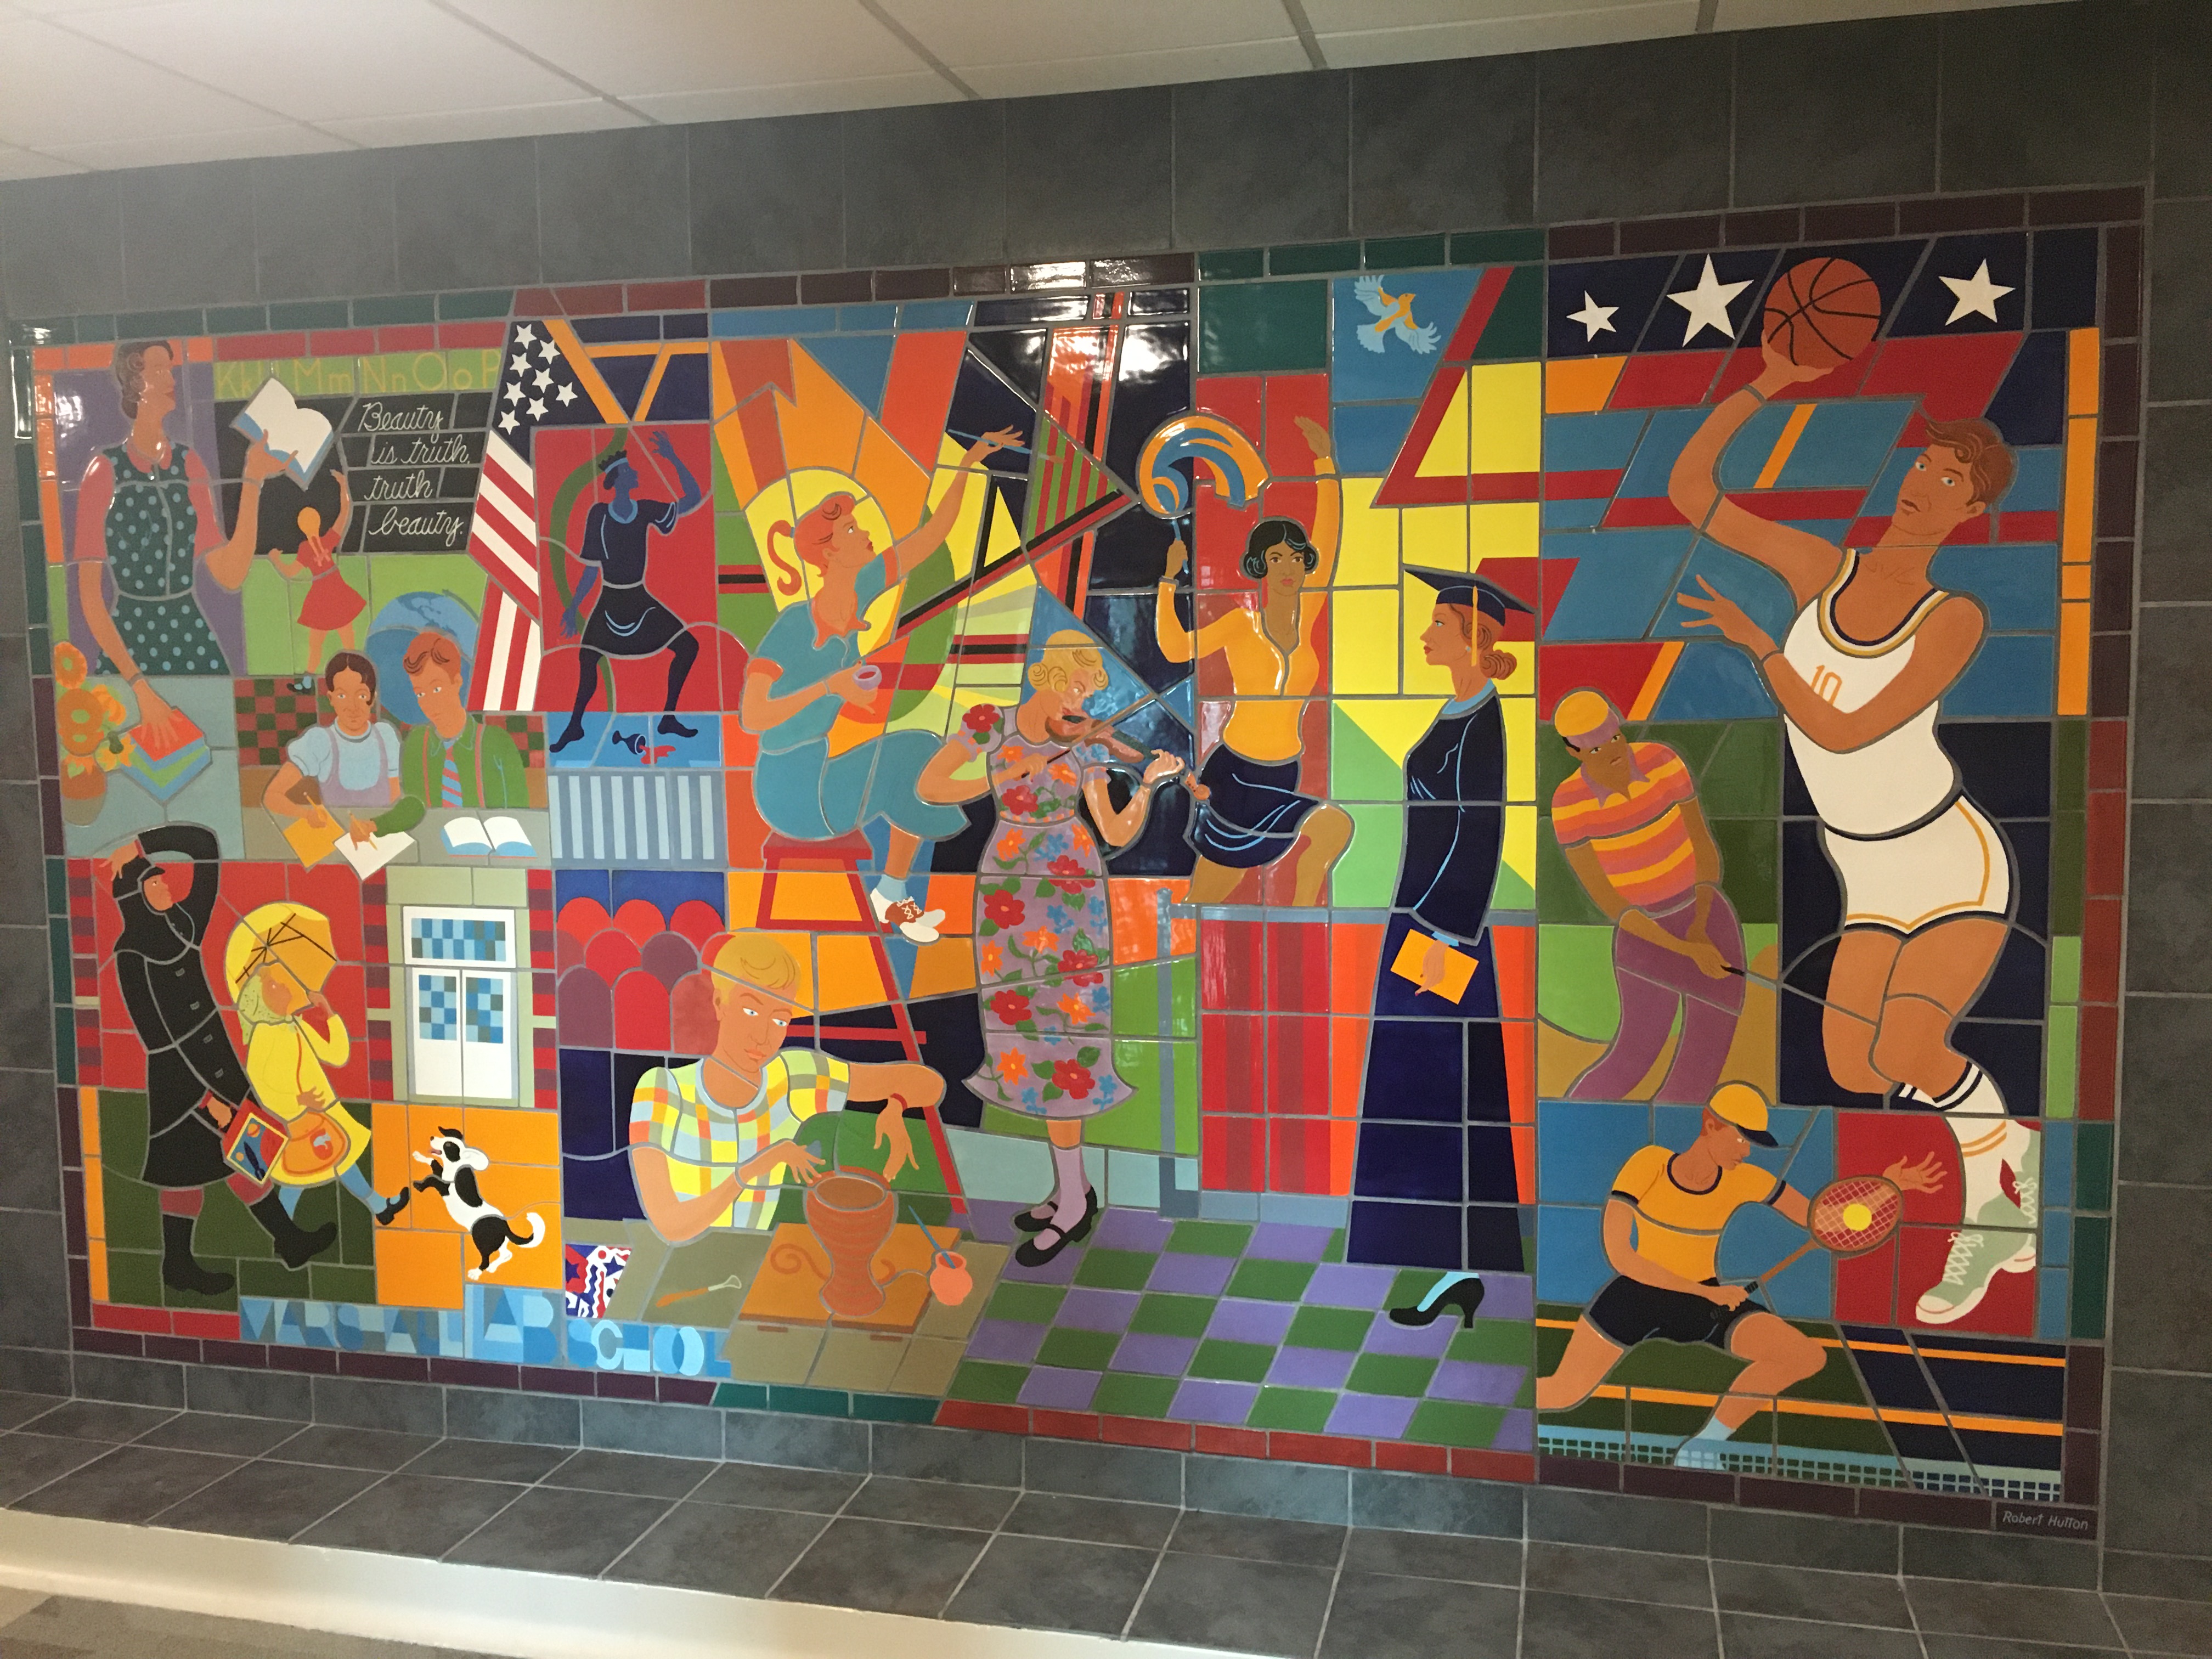 The Marshall Lab School Puzzle Tile Memorial mural was created during the 2019 renovations by Robert P. Hutton to commemorate the historic role of Jenkins Hall as a lab school.